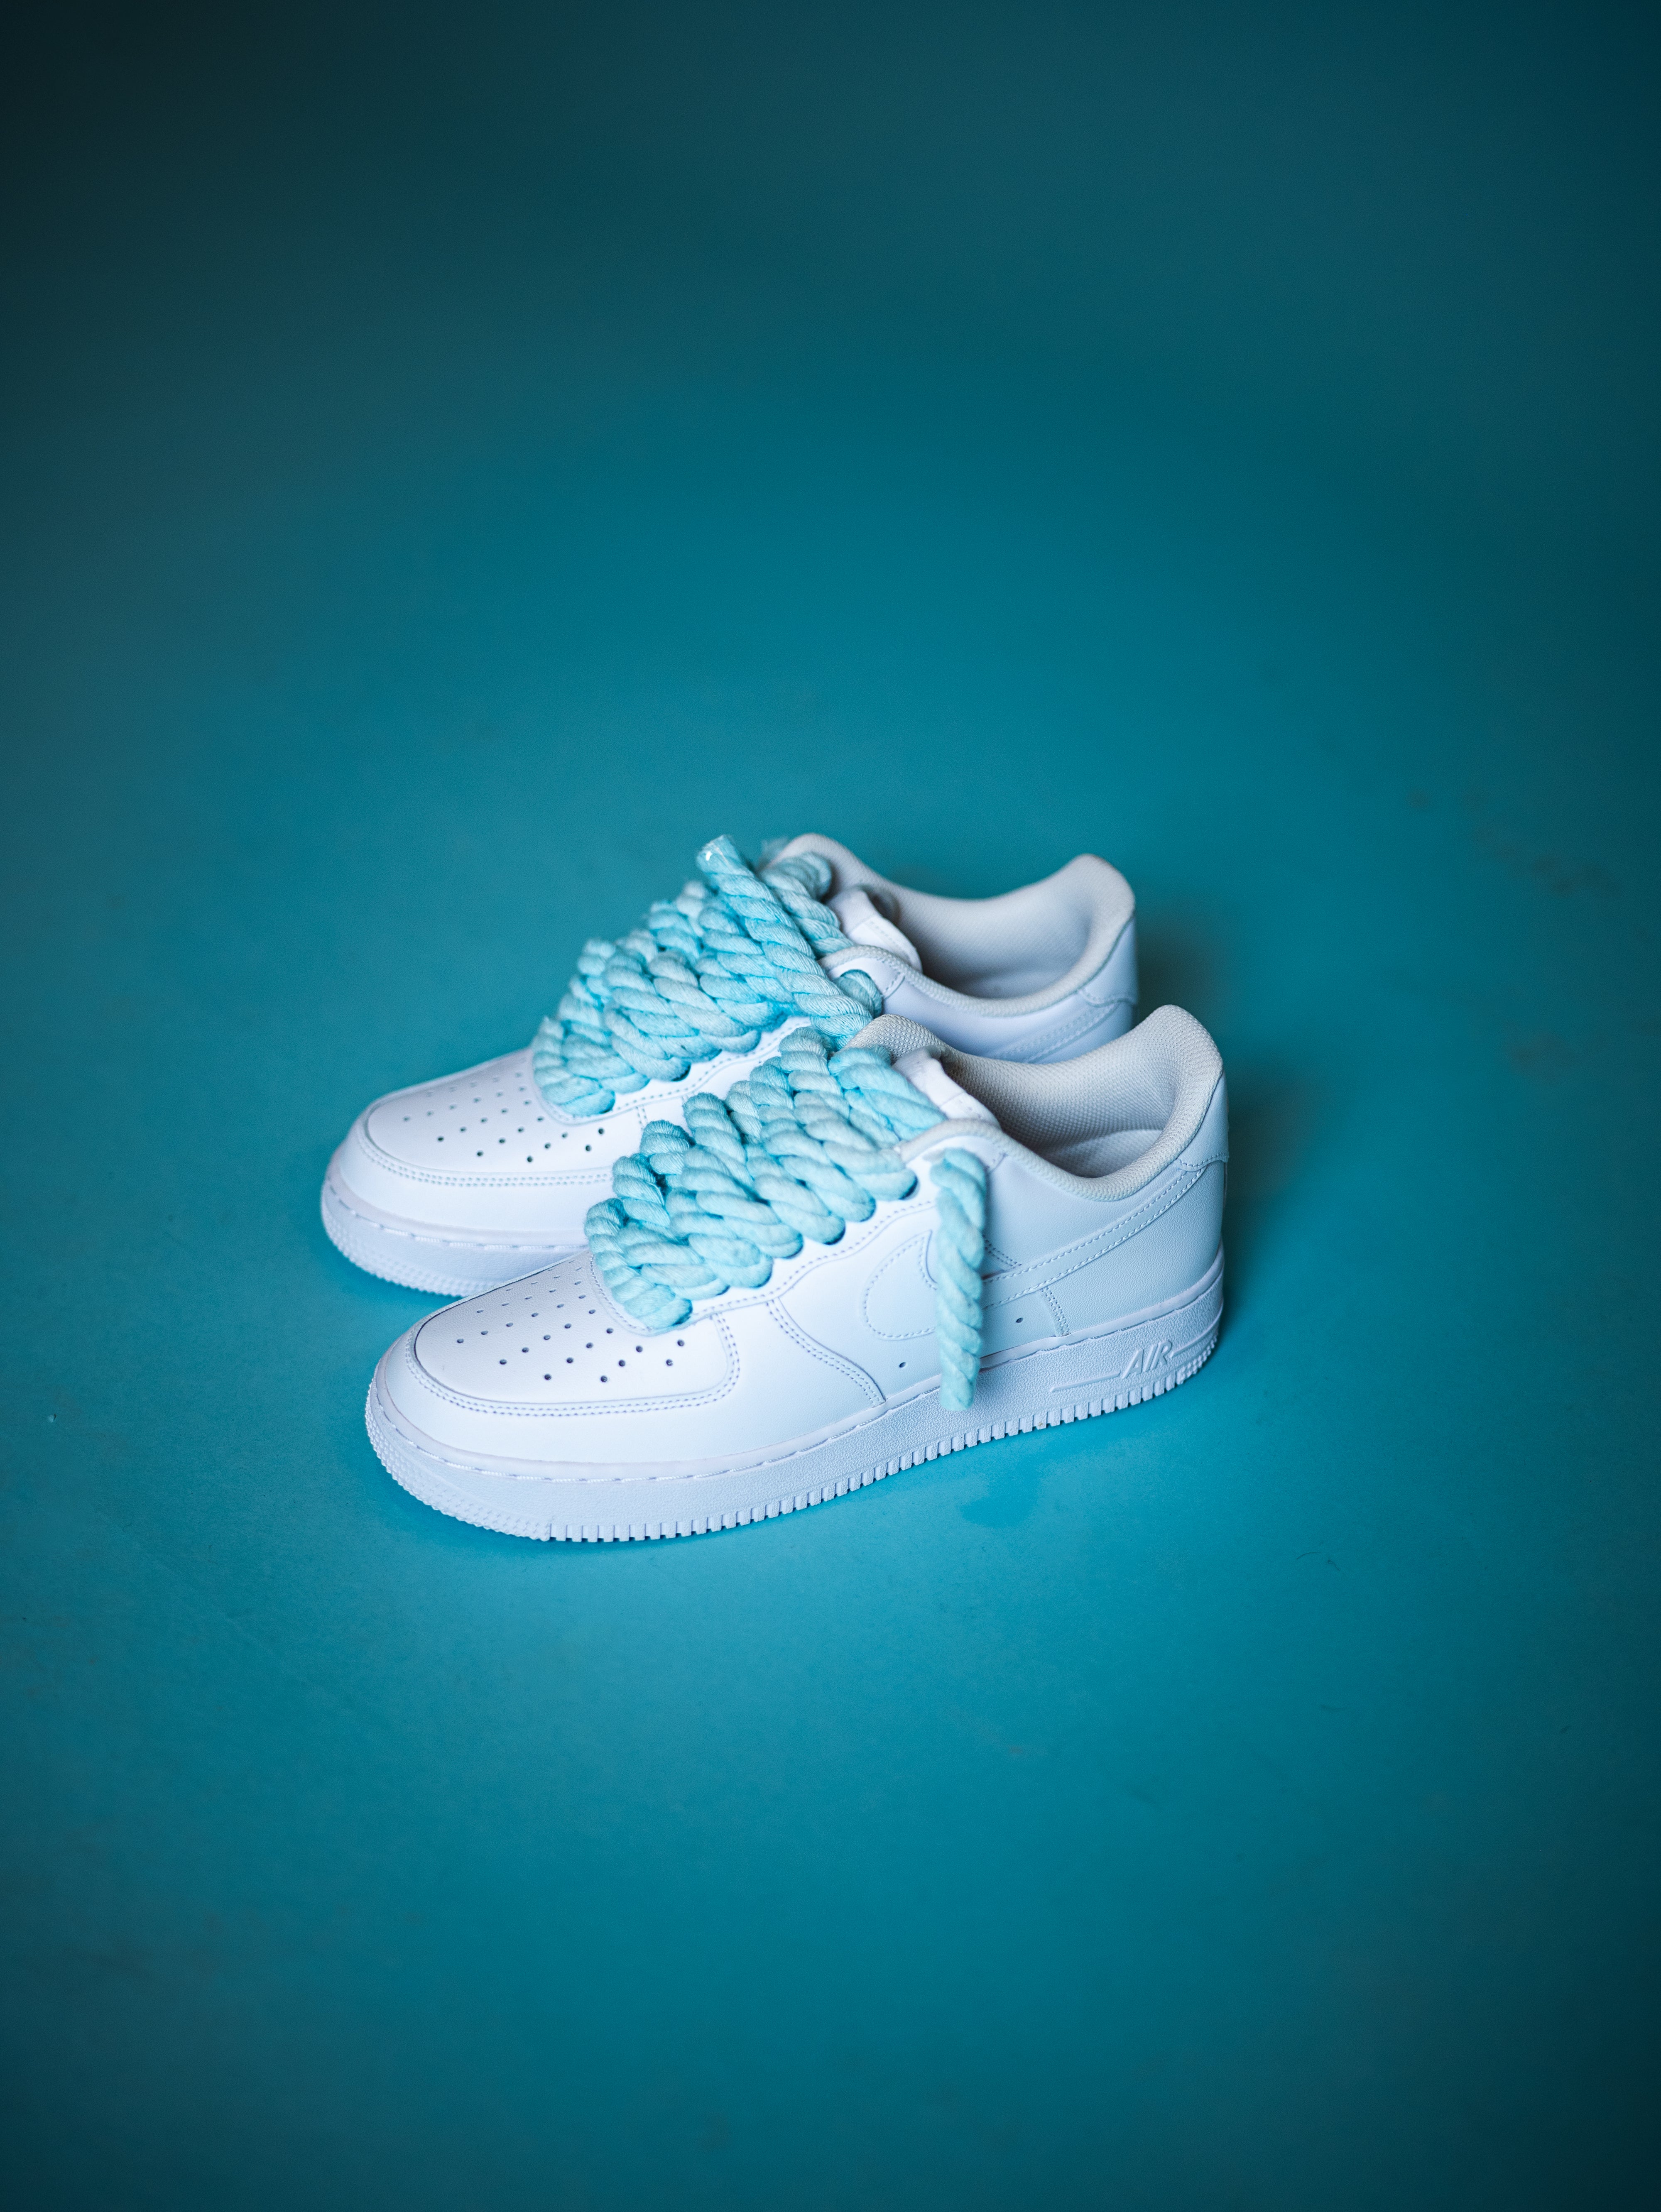 ROPE LACES - Ice blue